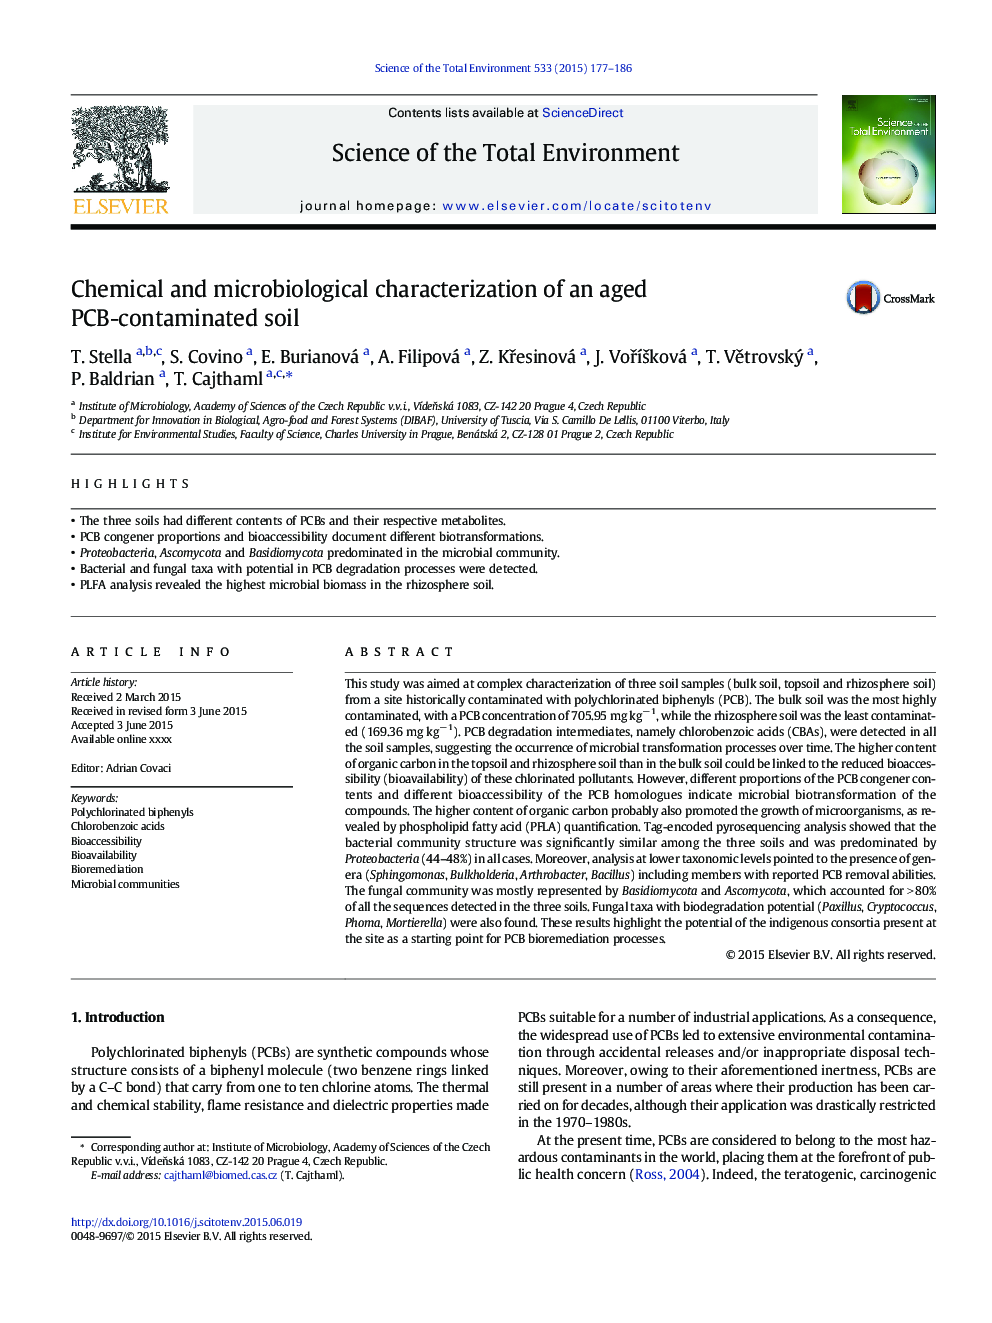 Chemical and microbiological characterization of an aged PCB-contaminated soil